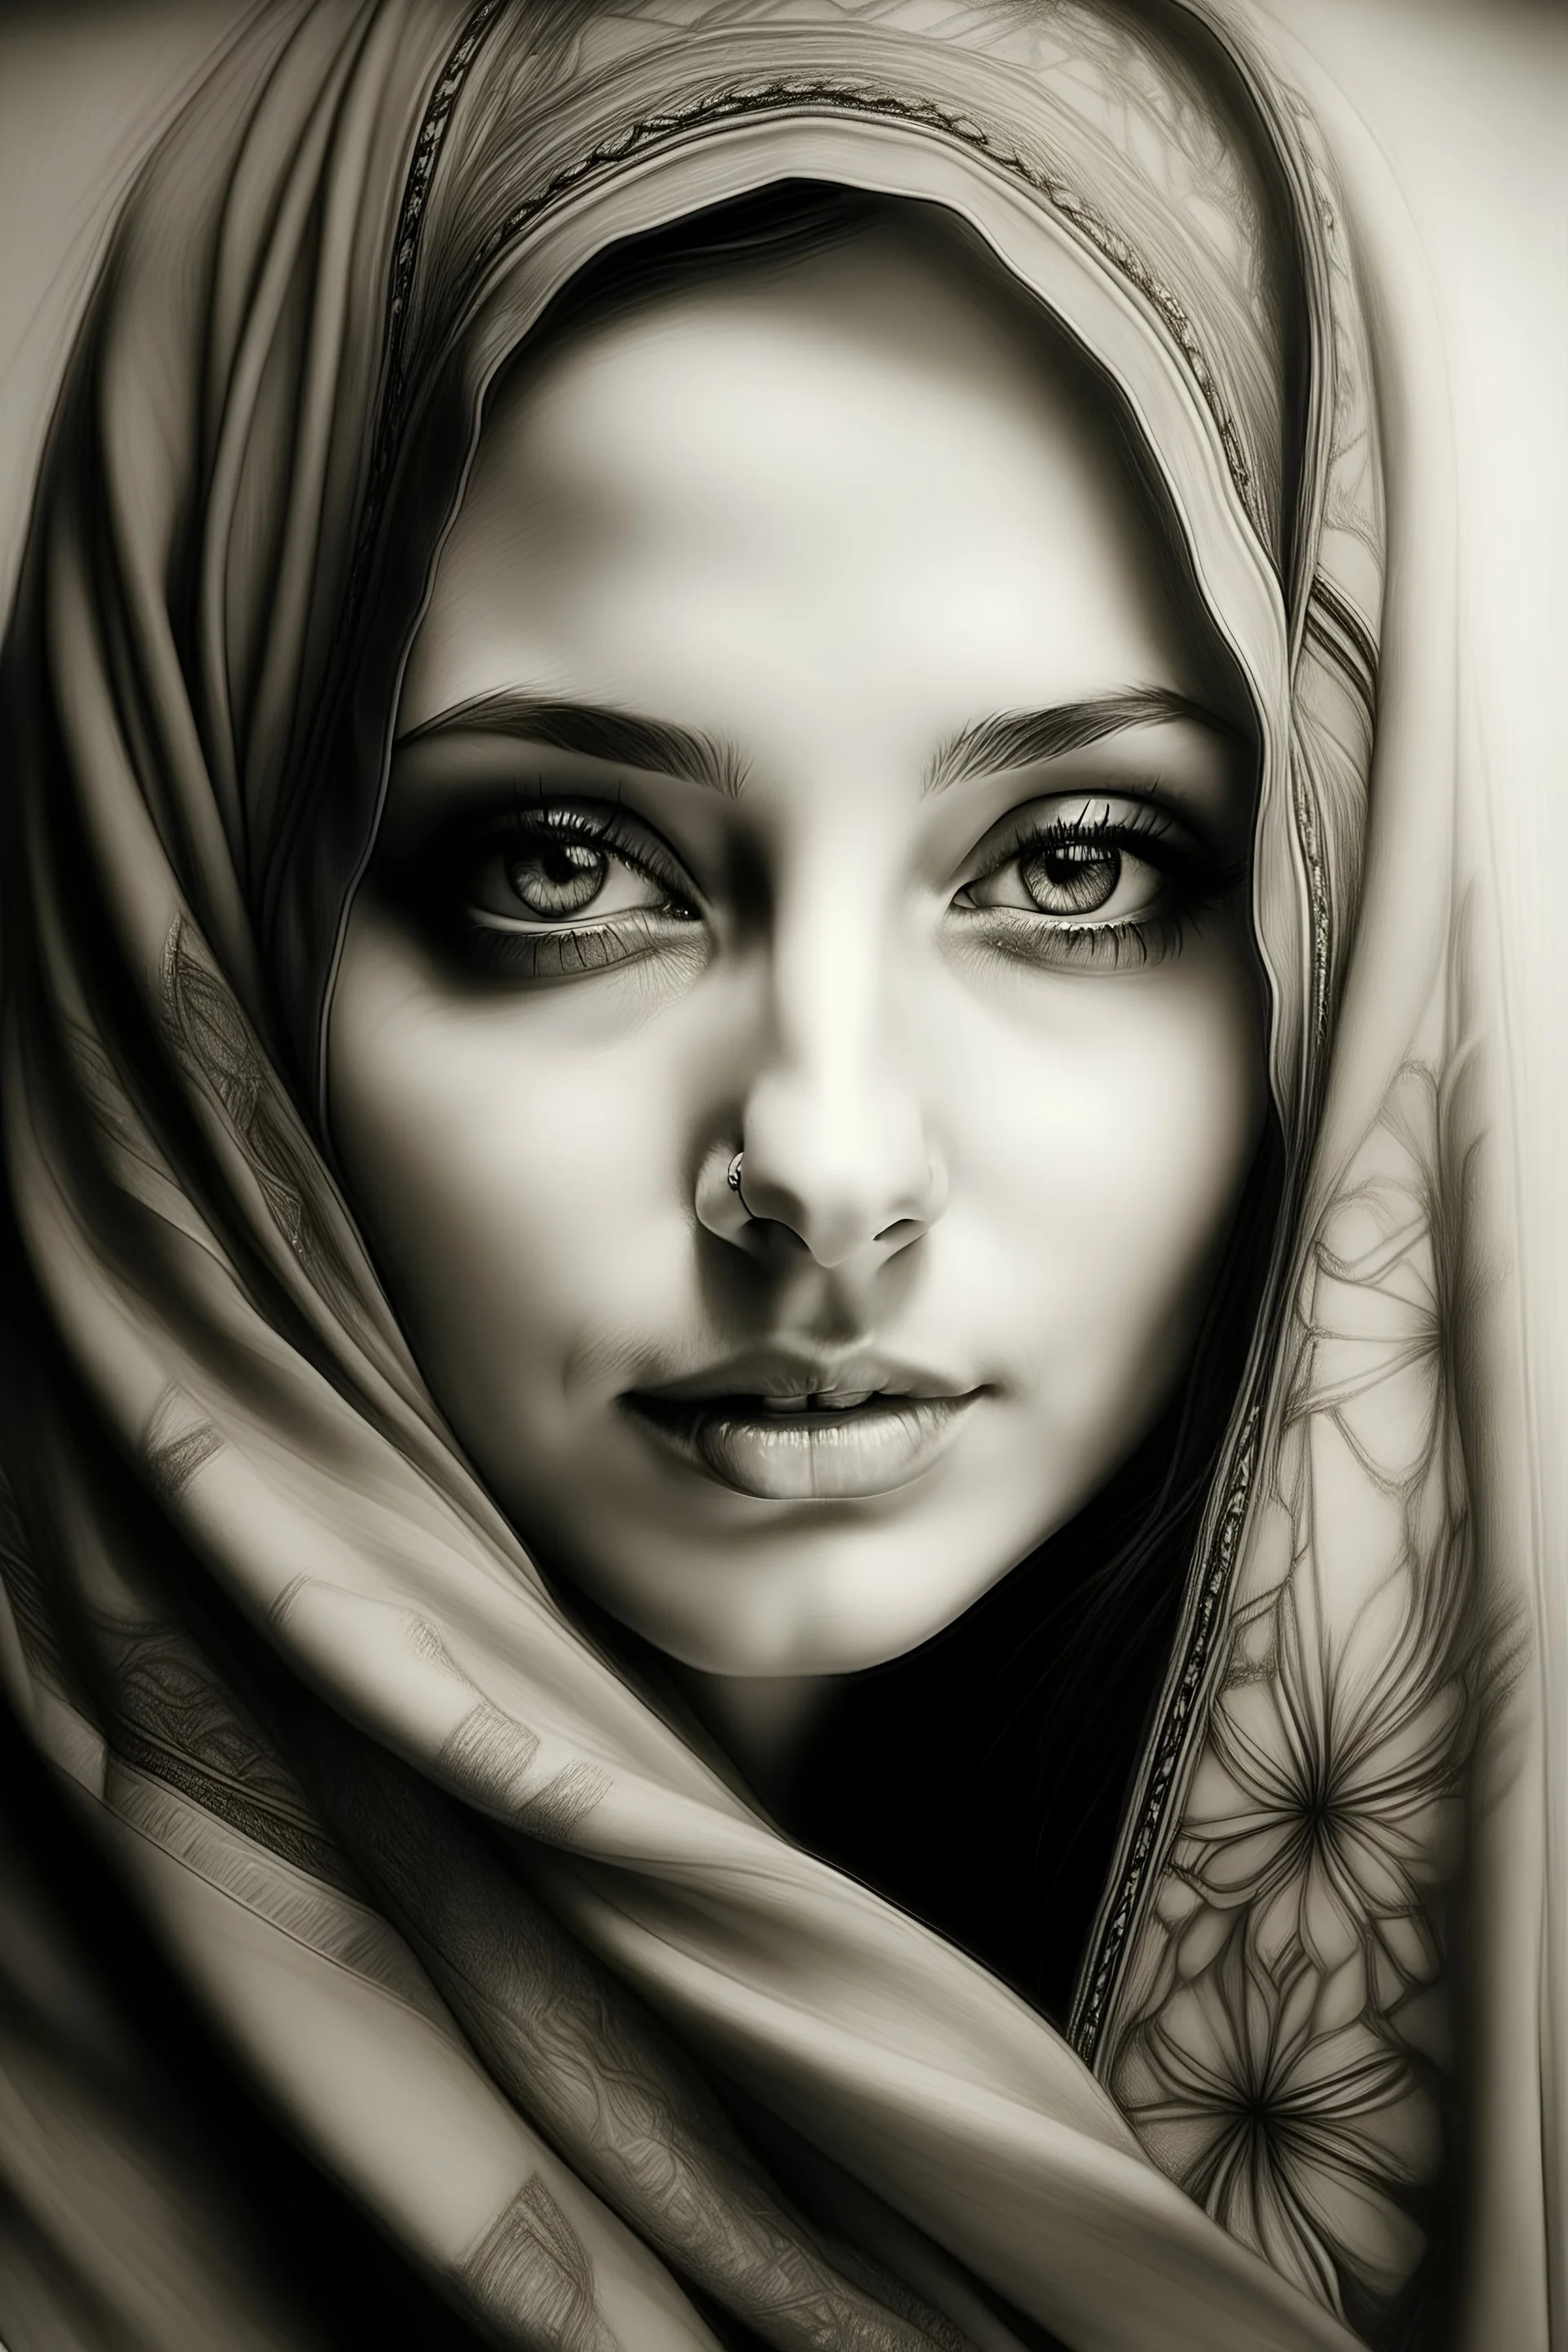 Draw me a picture of my beloved Mays, with big brown eyes, wearing her hijab, and with smooth, white skin